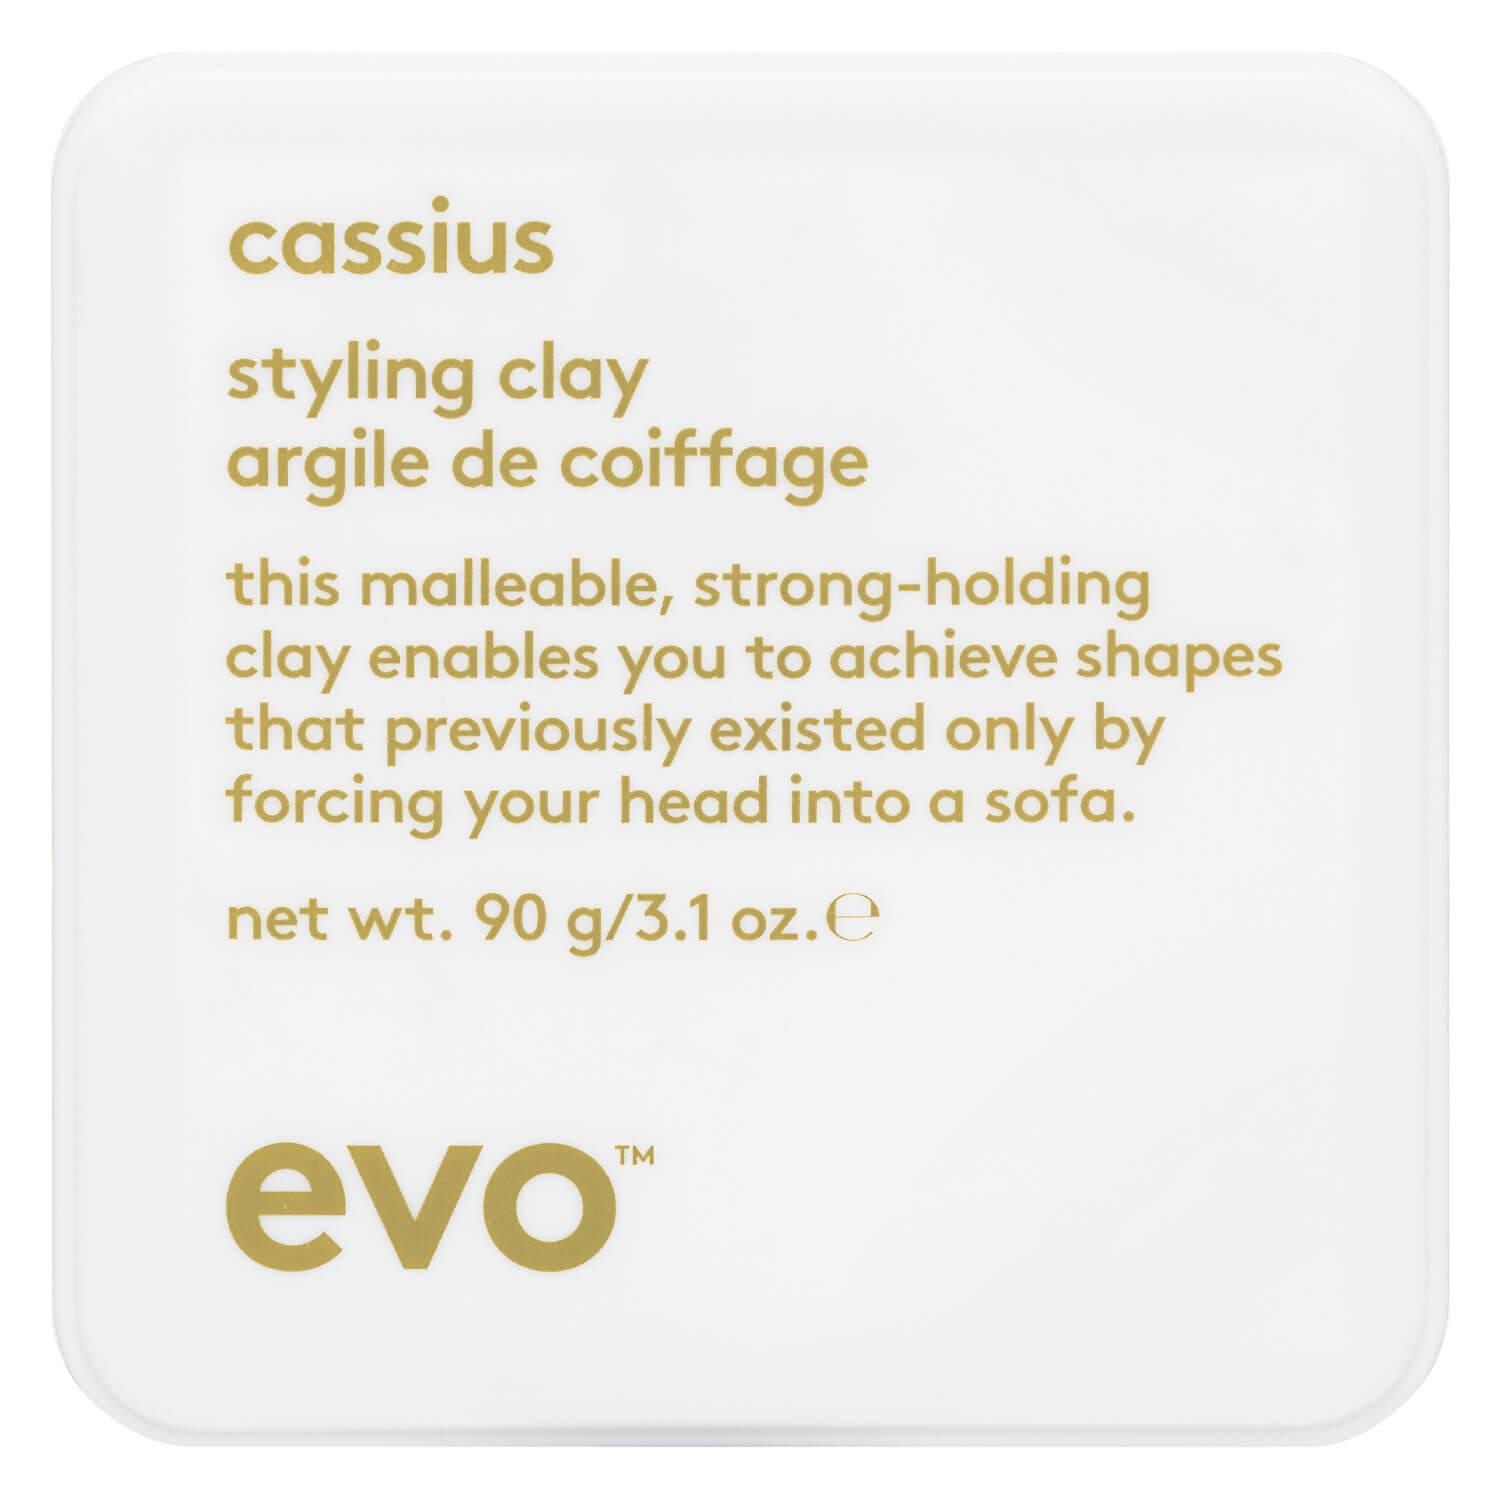 evo style - cassius styling clay